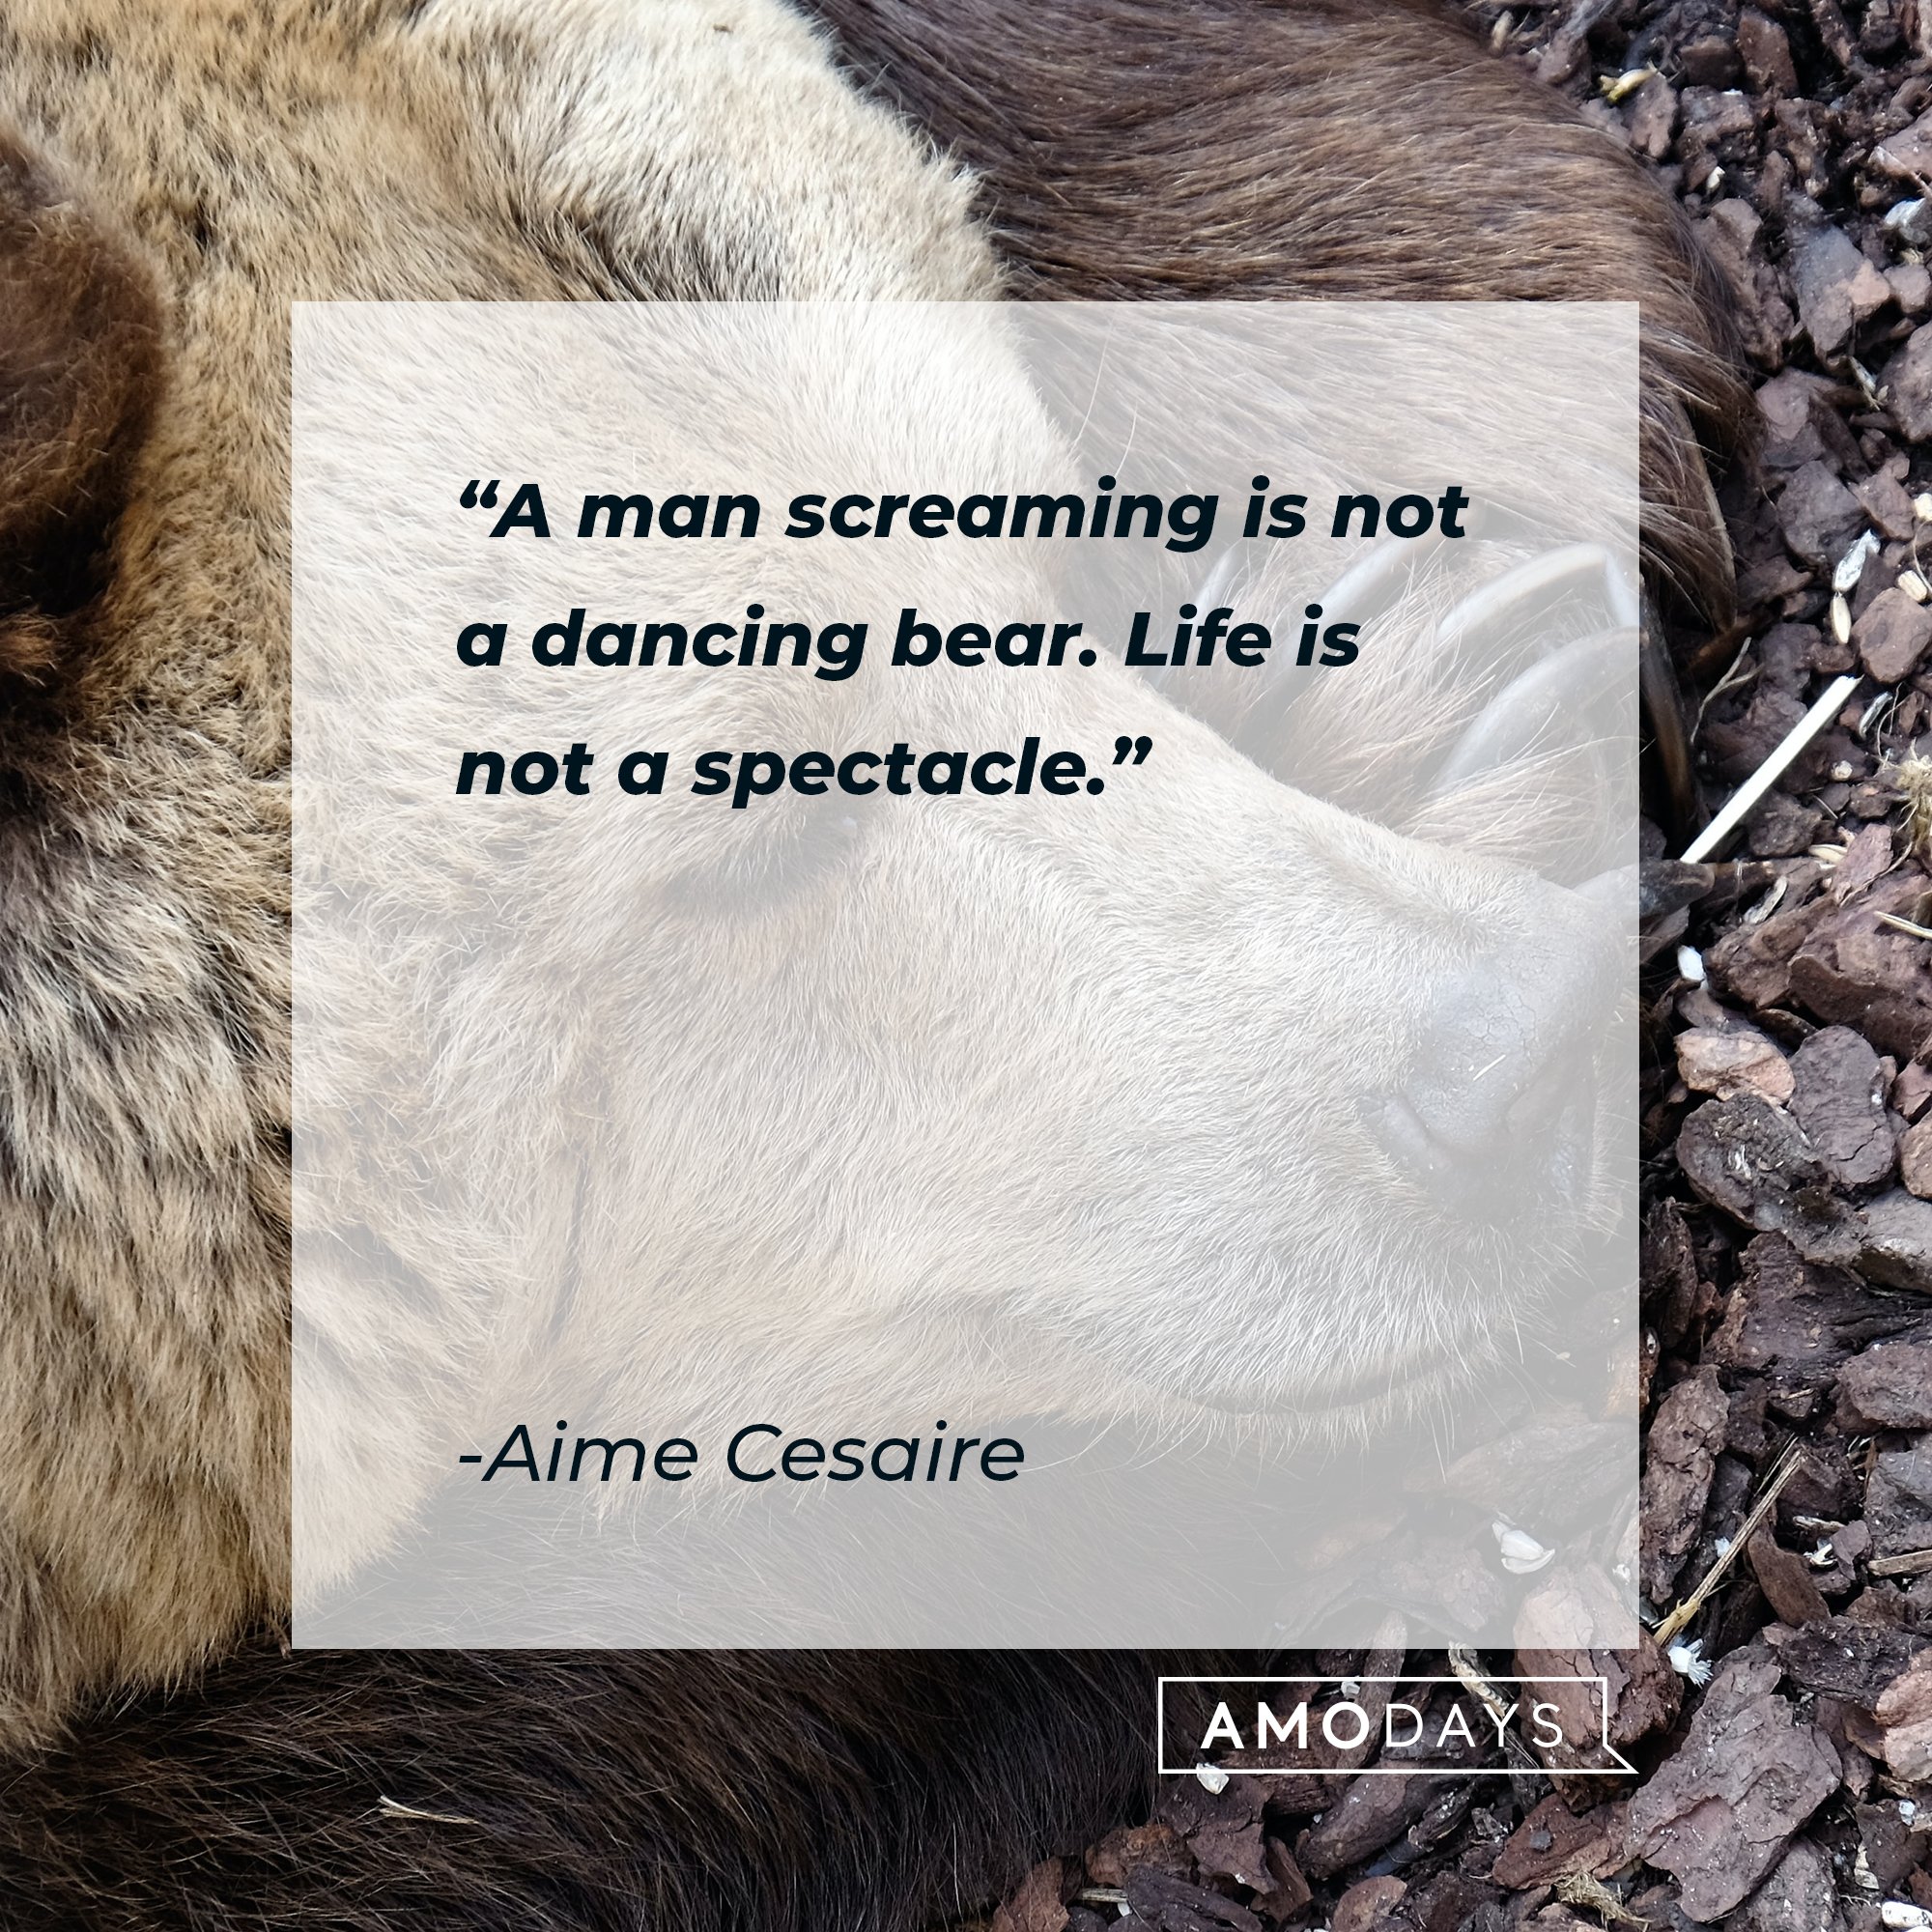  Aime Cesaire’s quote: "A man screaming is not a dancing bear. Life is not a spectacle." | Image: AmoDays